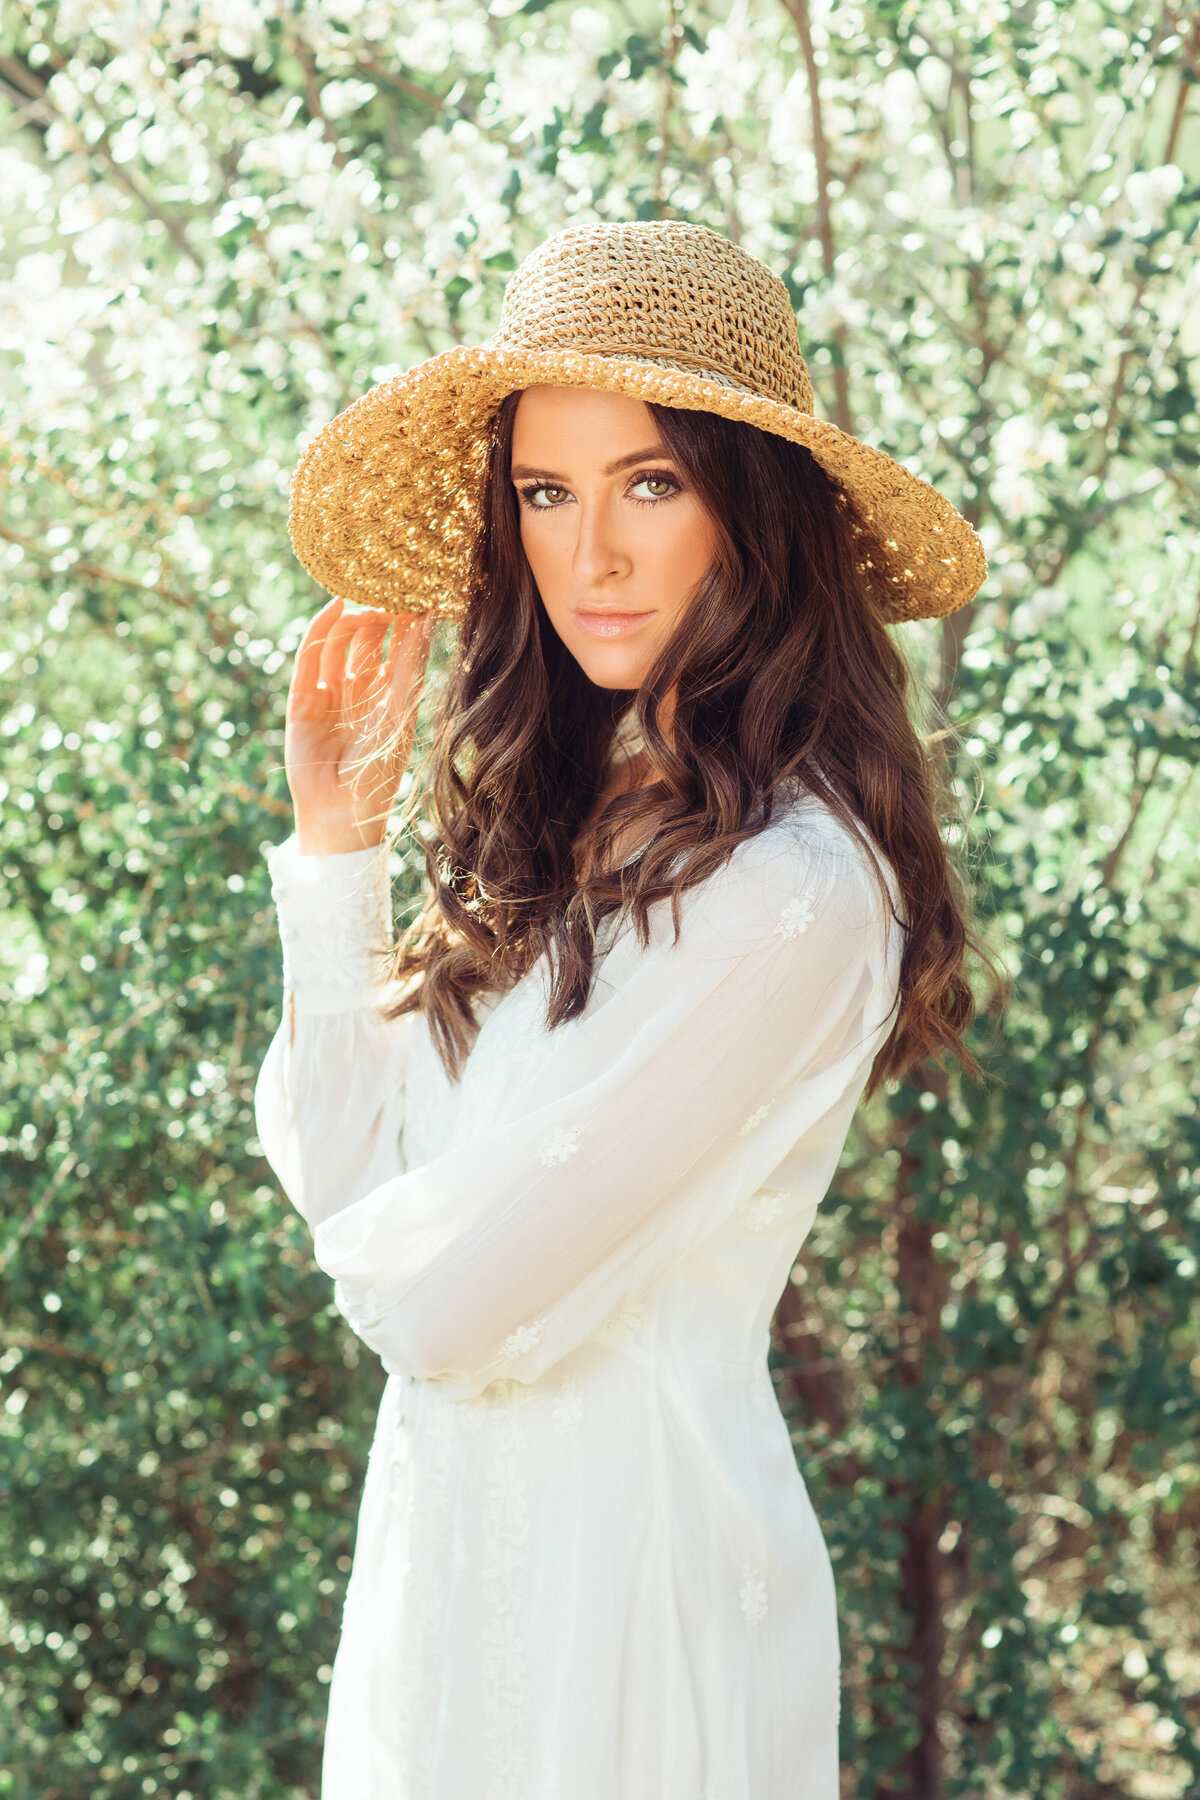 Portrait Photo Of Young Woman In White Dress And Native Hat Los Angeles